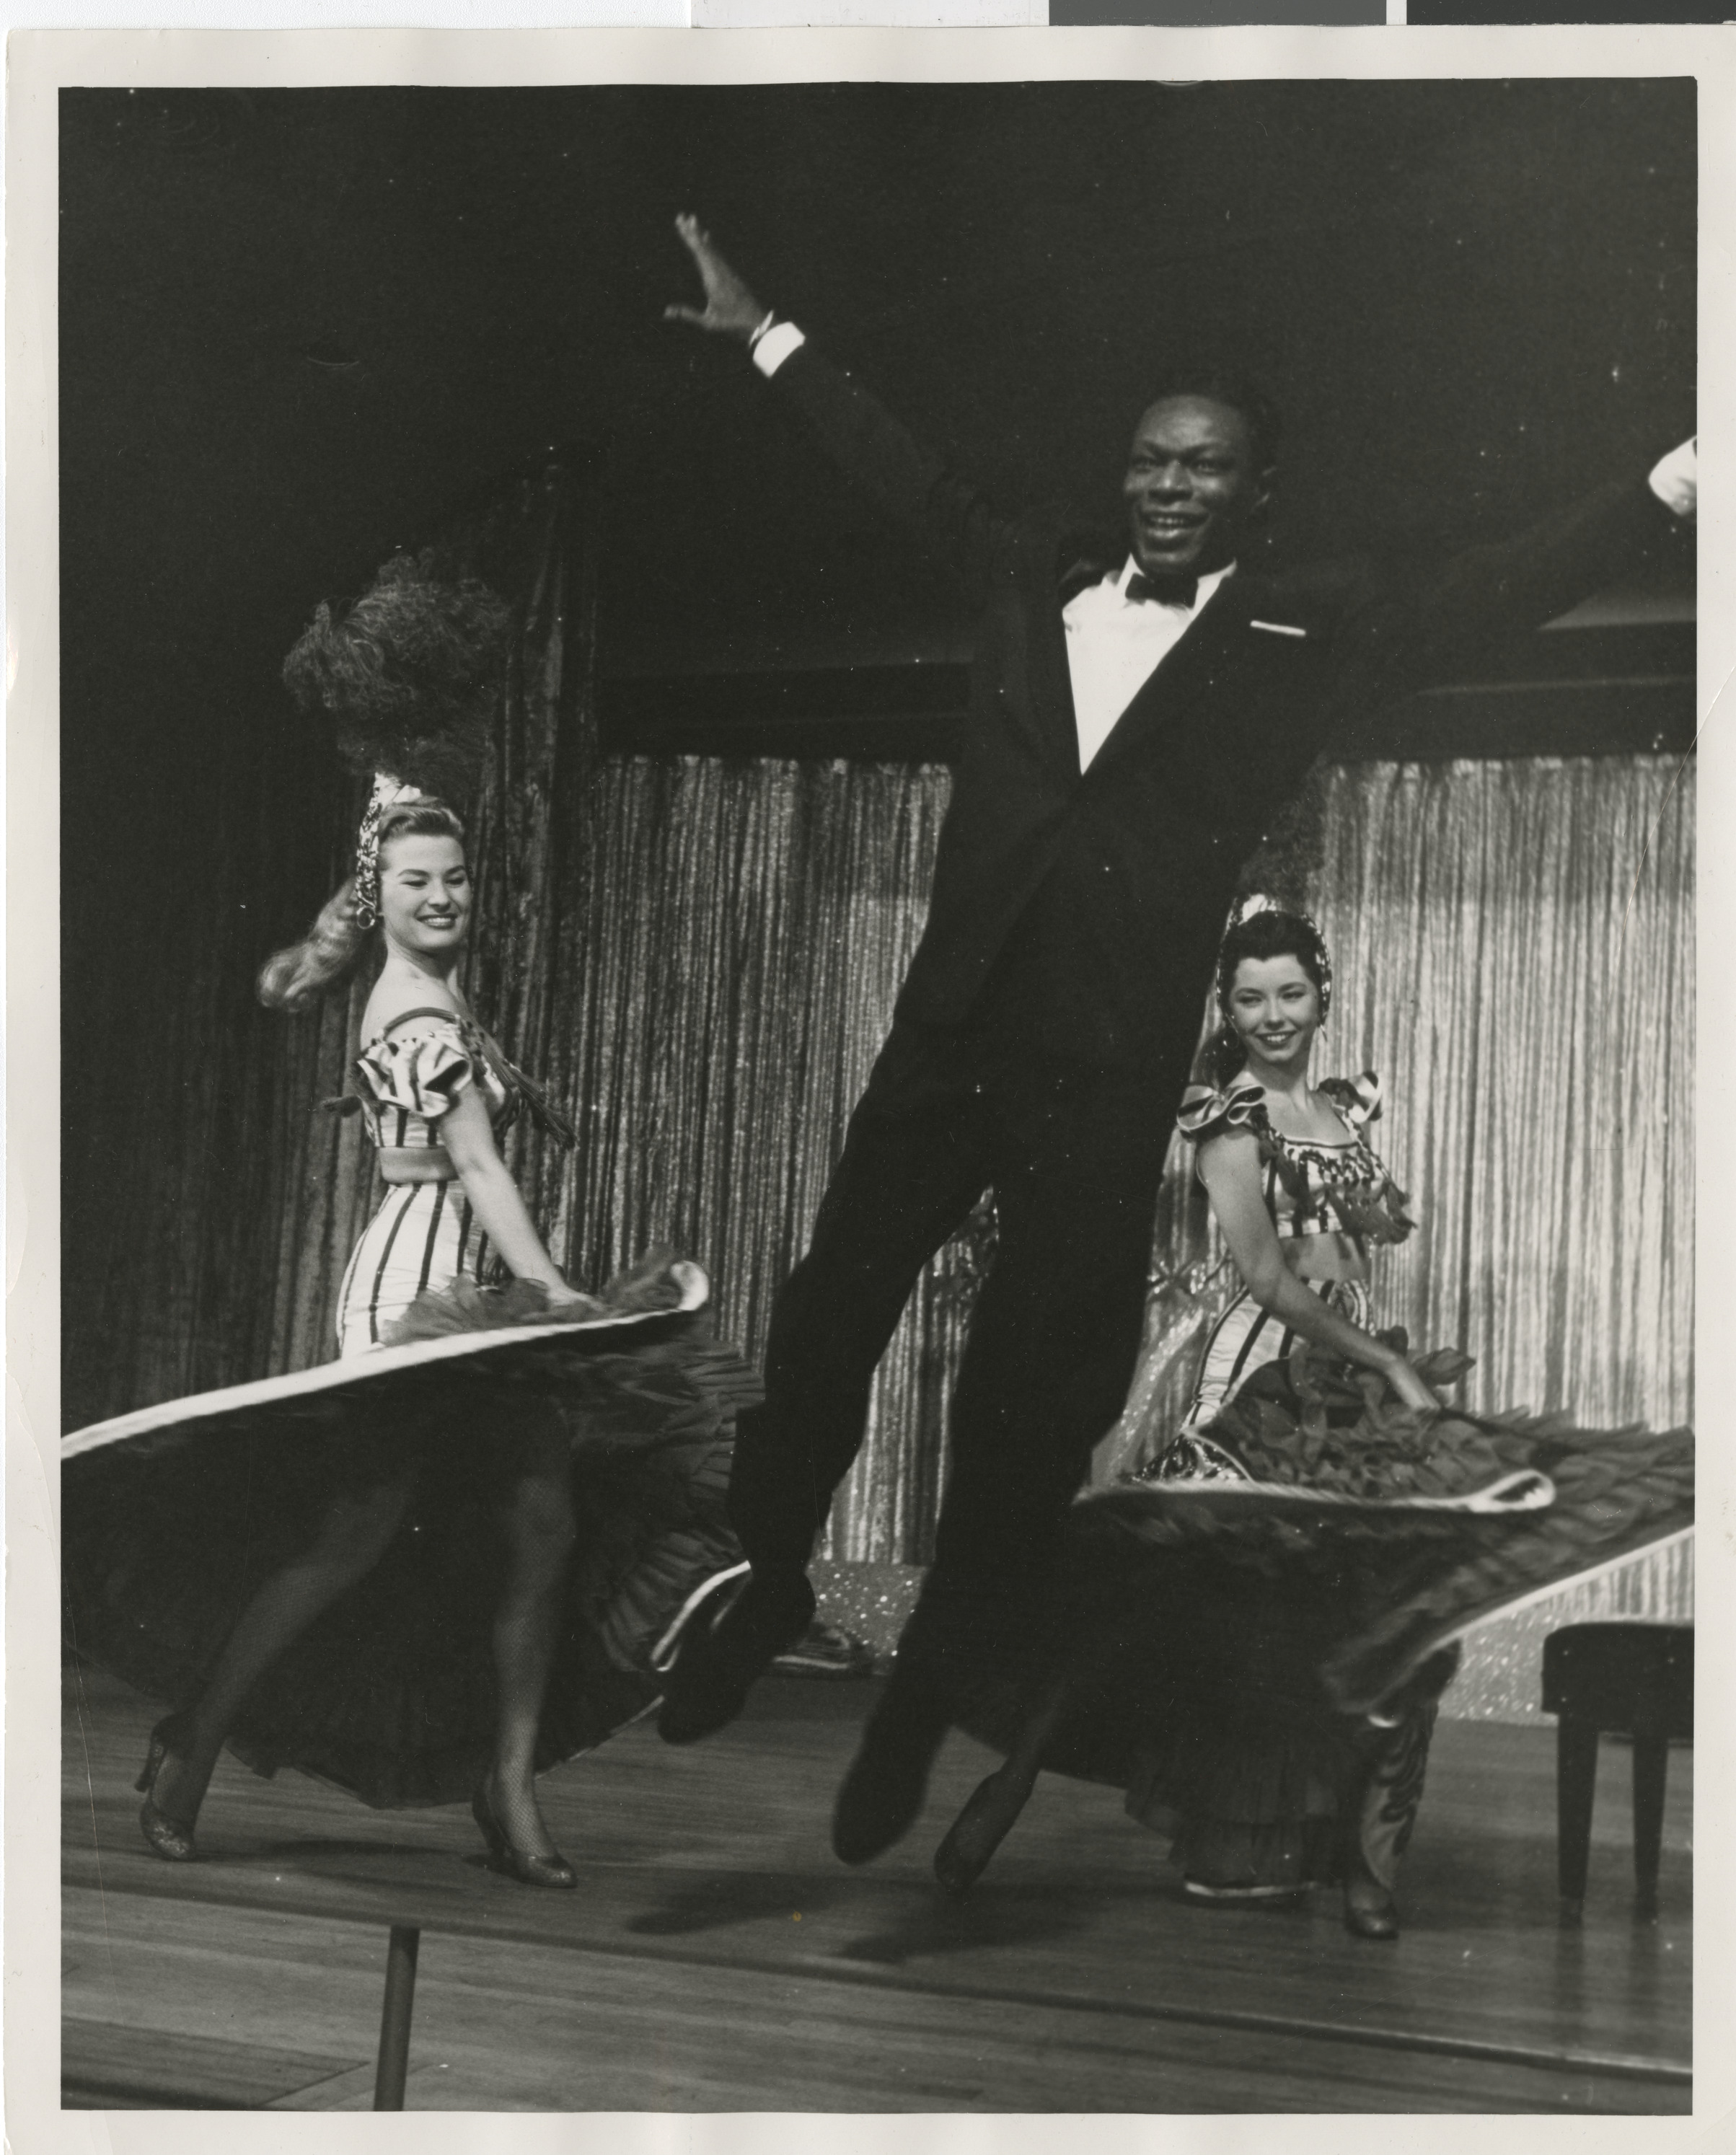 Cole onstage, image 011